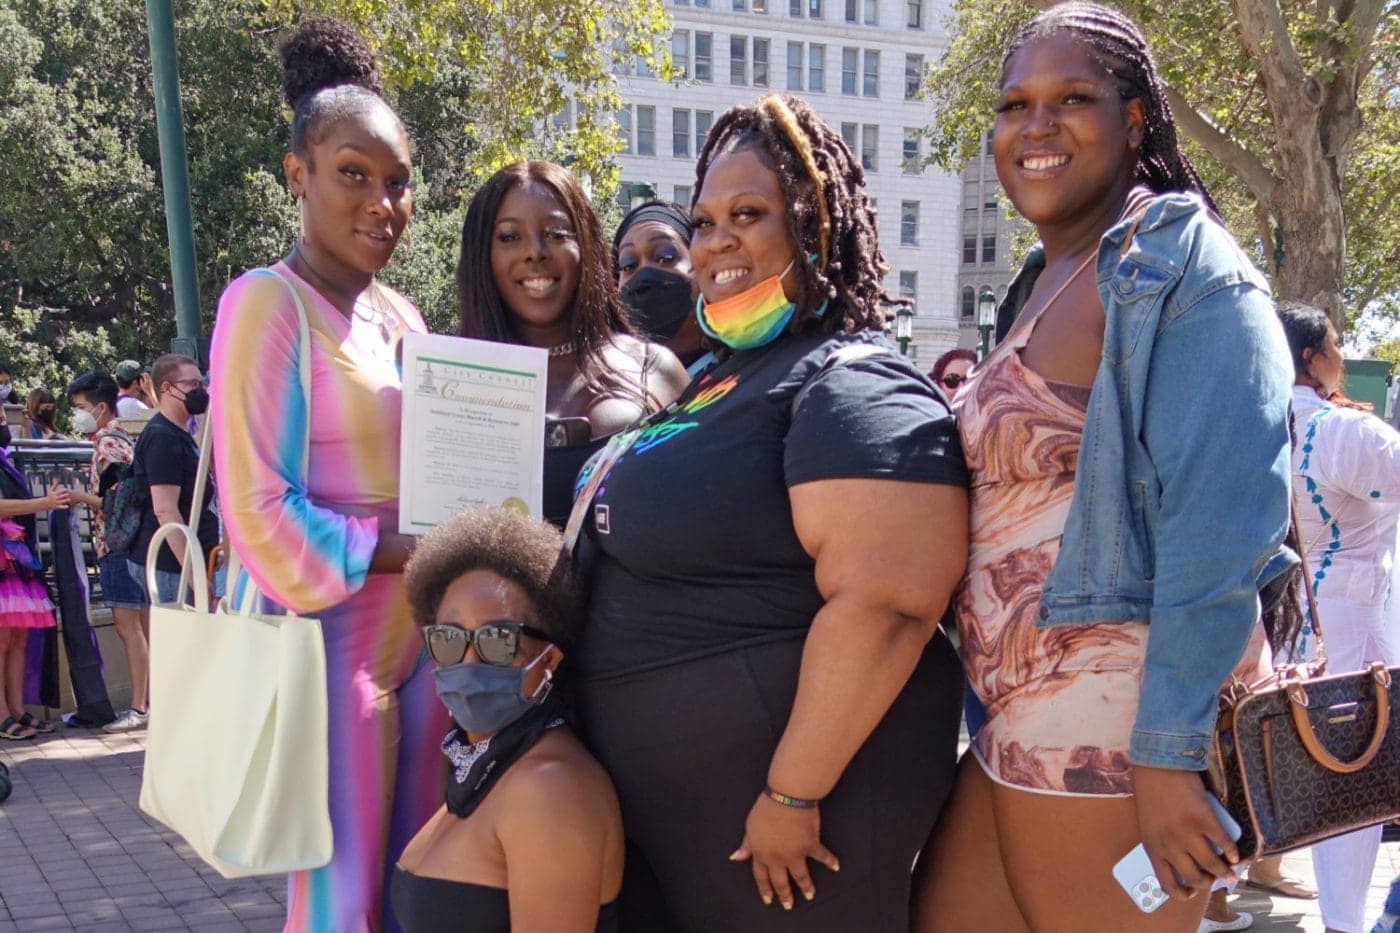 Oakland-Trans-March-by-Biron-0922-1400x933, Black and beautiful, out and proud: Why Black queer visibility matters, Culture Currents 